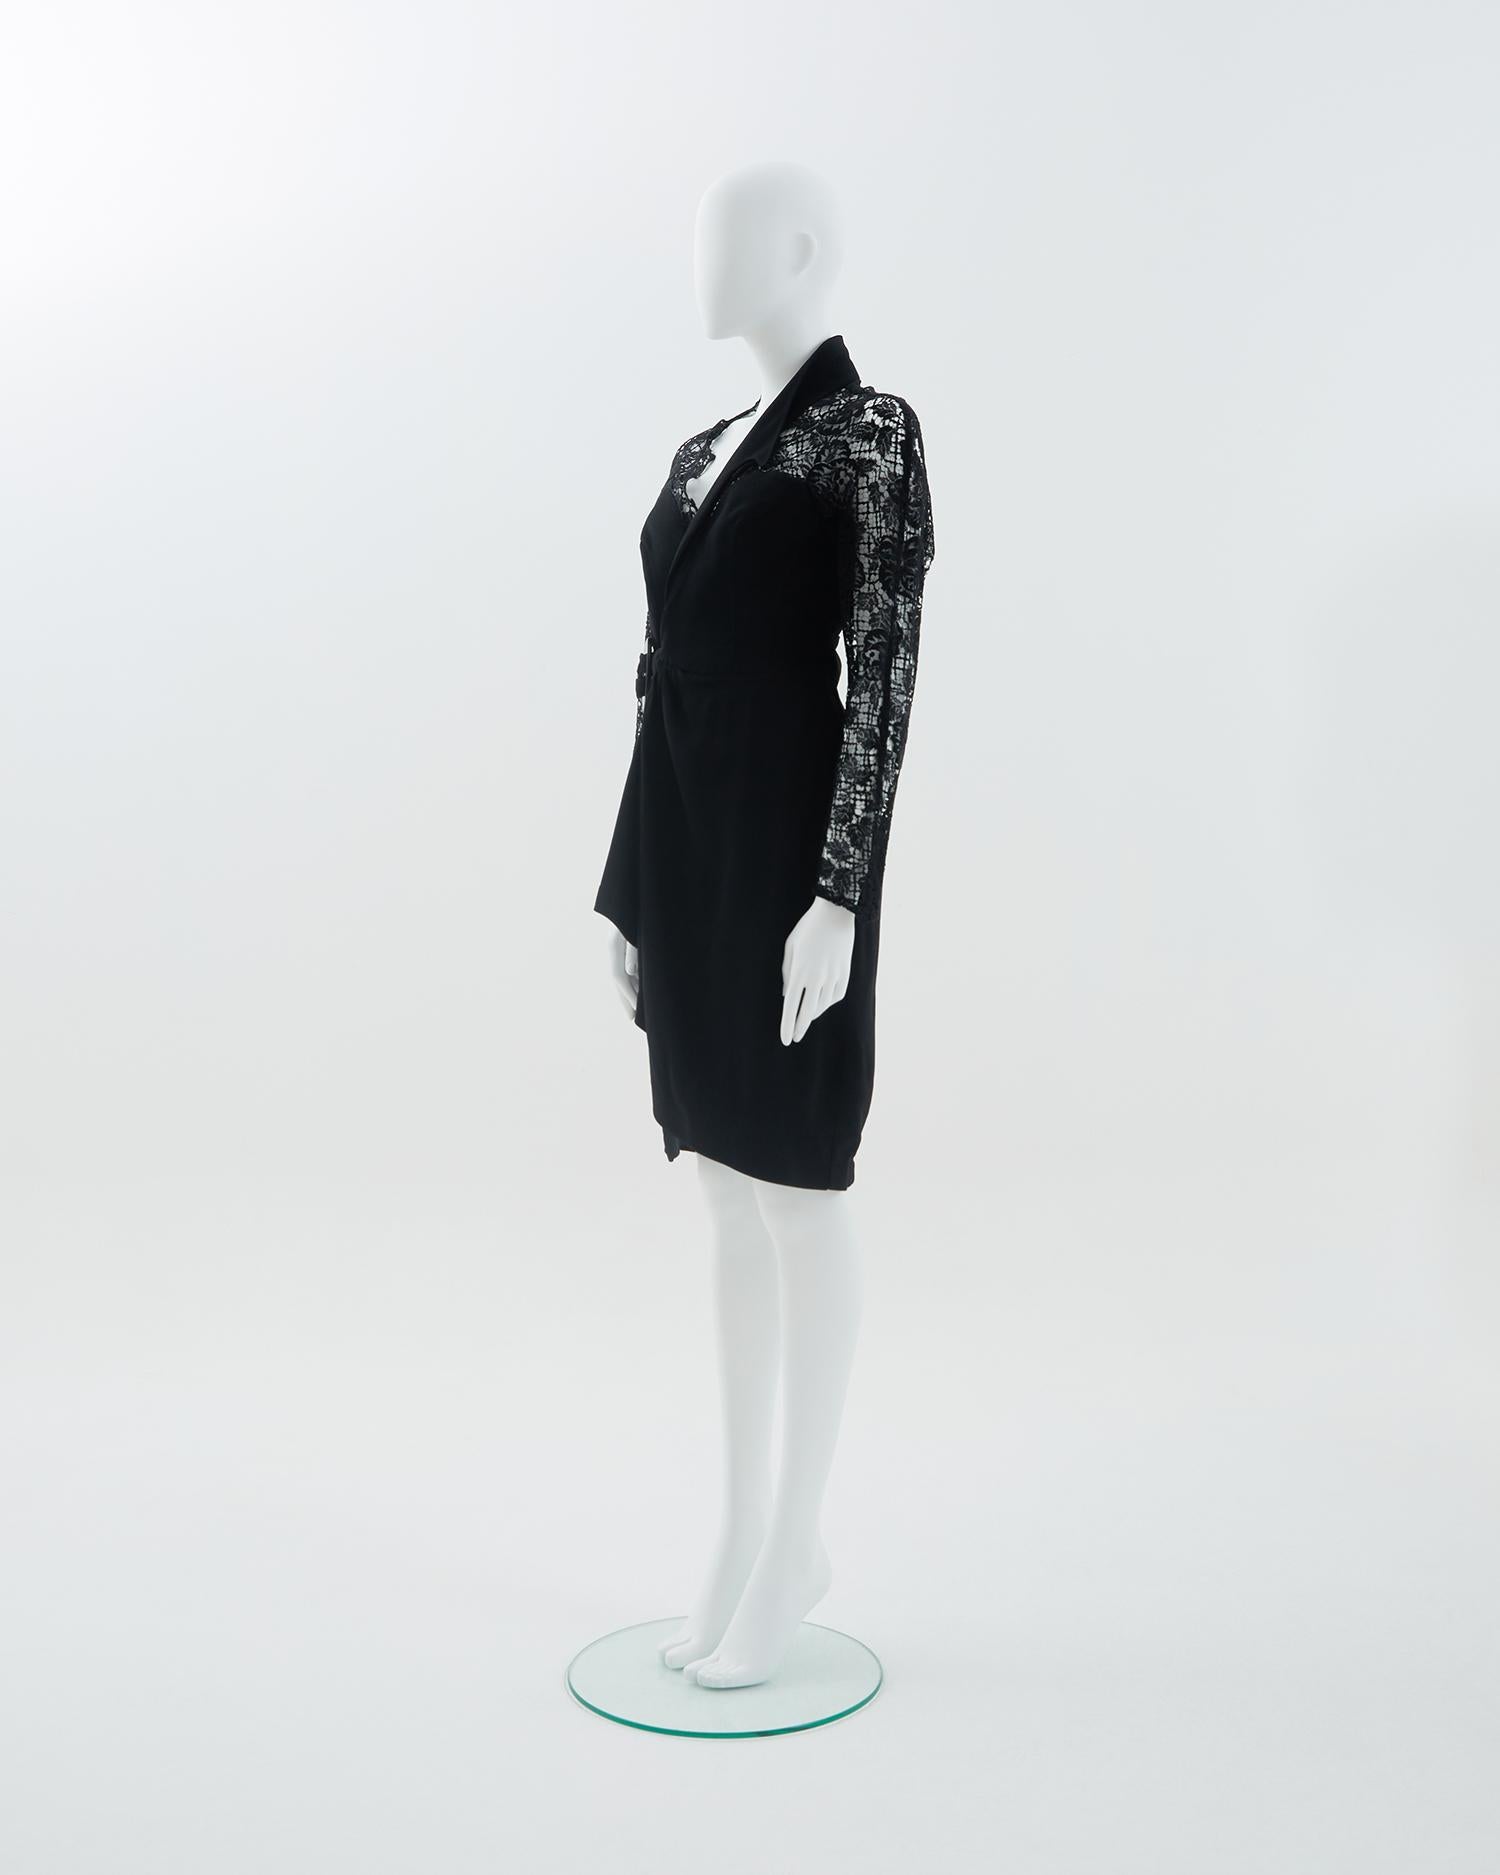 - Black rayon blend crepe asymmetrically draped cocktail dress
- Sold by Skof.Archive
- Asymmetrically draped 
- Plastic iconic buckle closure 
- Sheer lace back and sleeves 
- Fitted to the body 
- 1980s period

Size
FR 40 - EN 44 - UK 12 - US 8